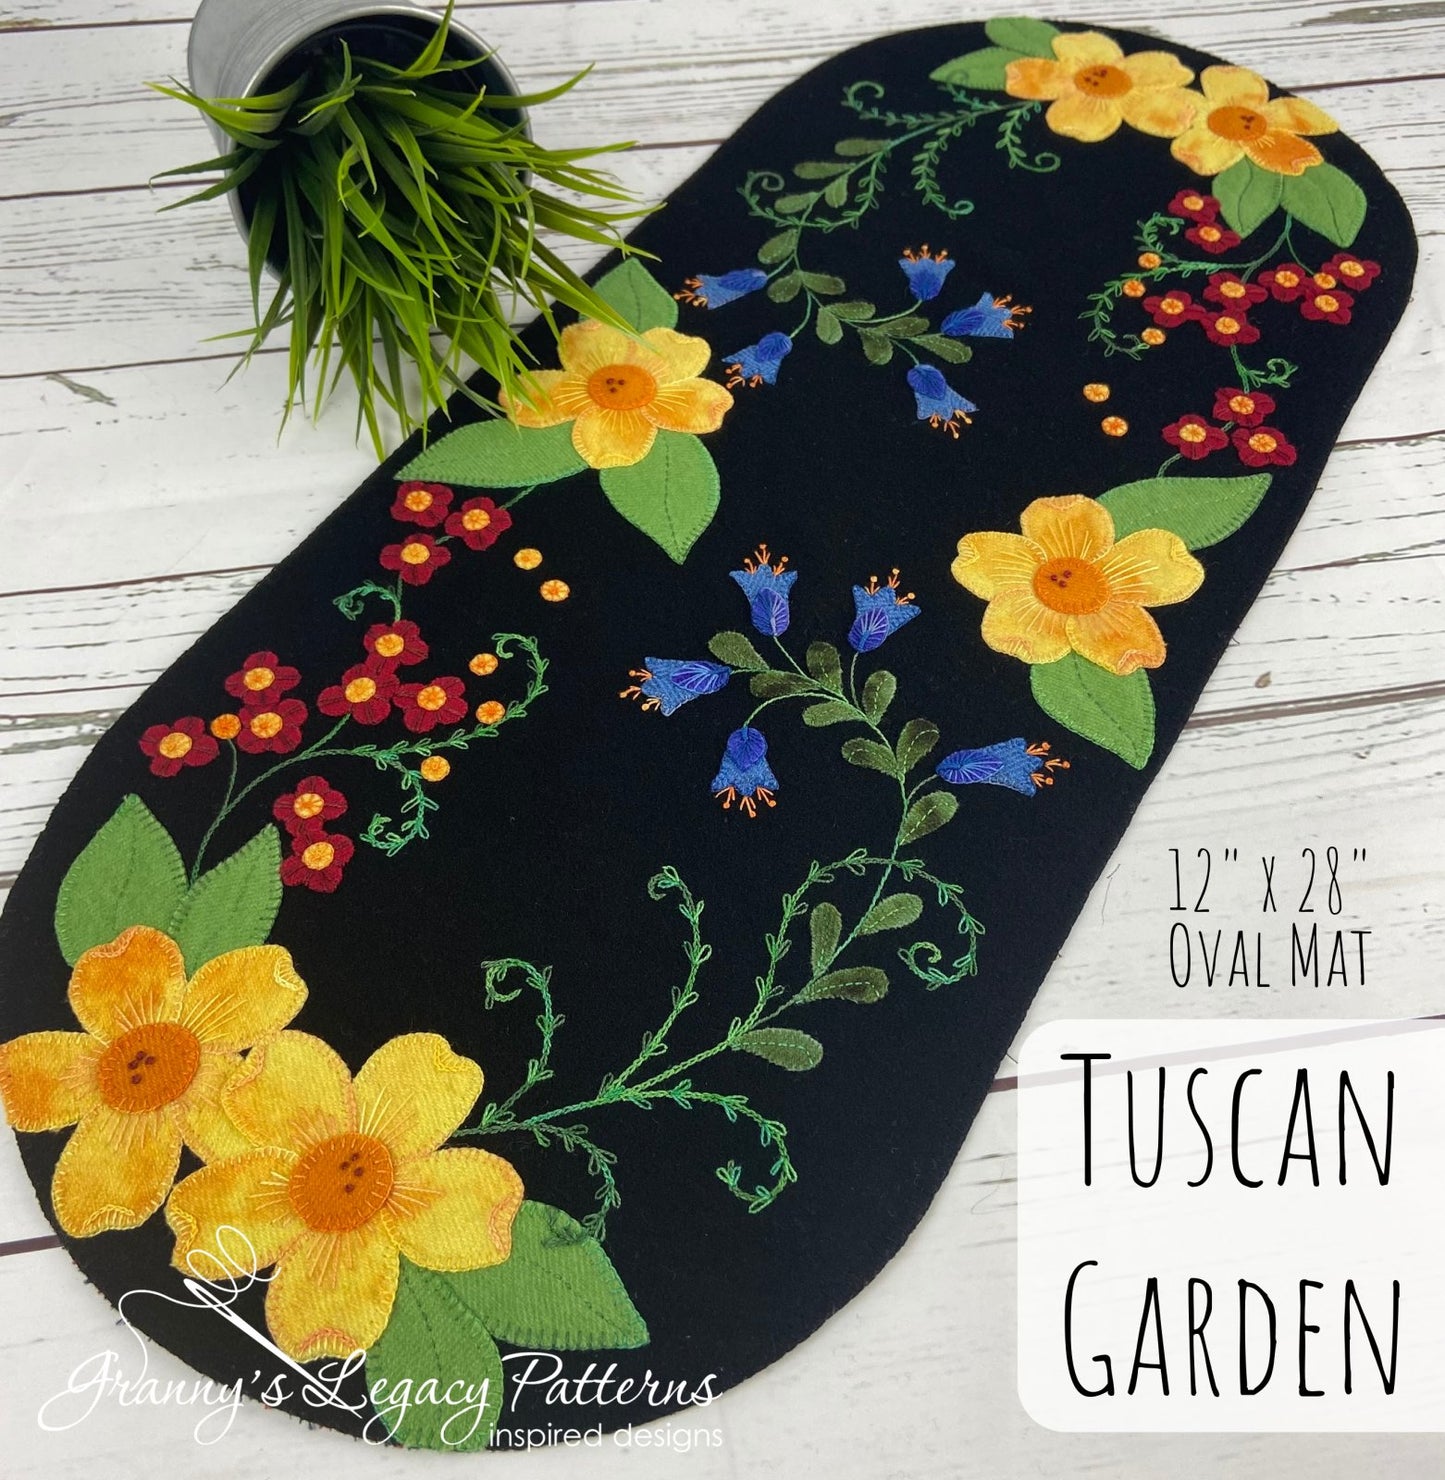 Tuscan Garden Pattern by Granny's Legacy Patterns